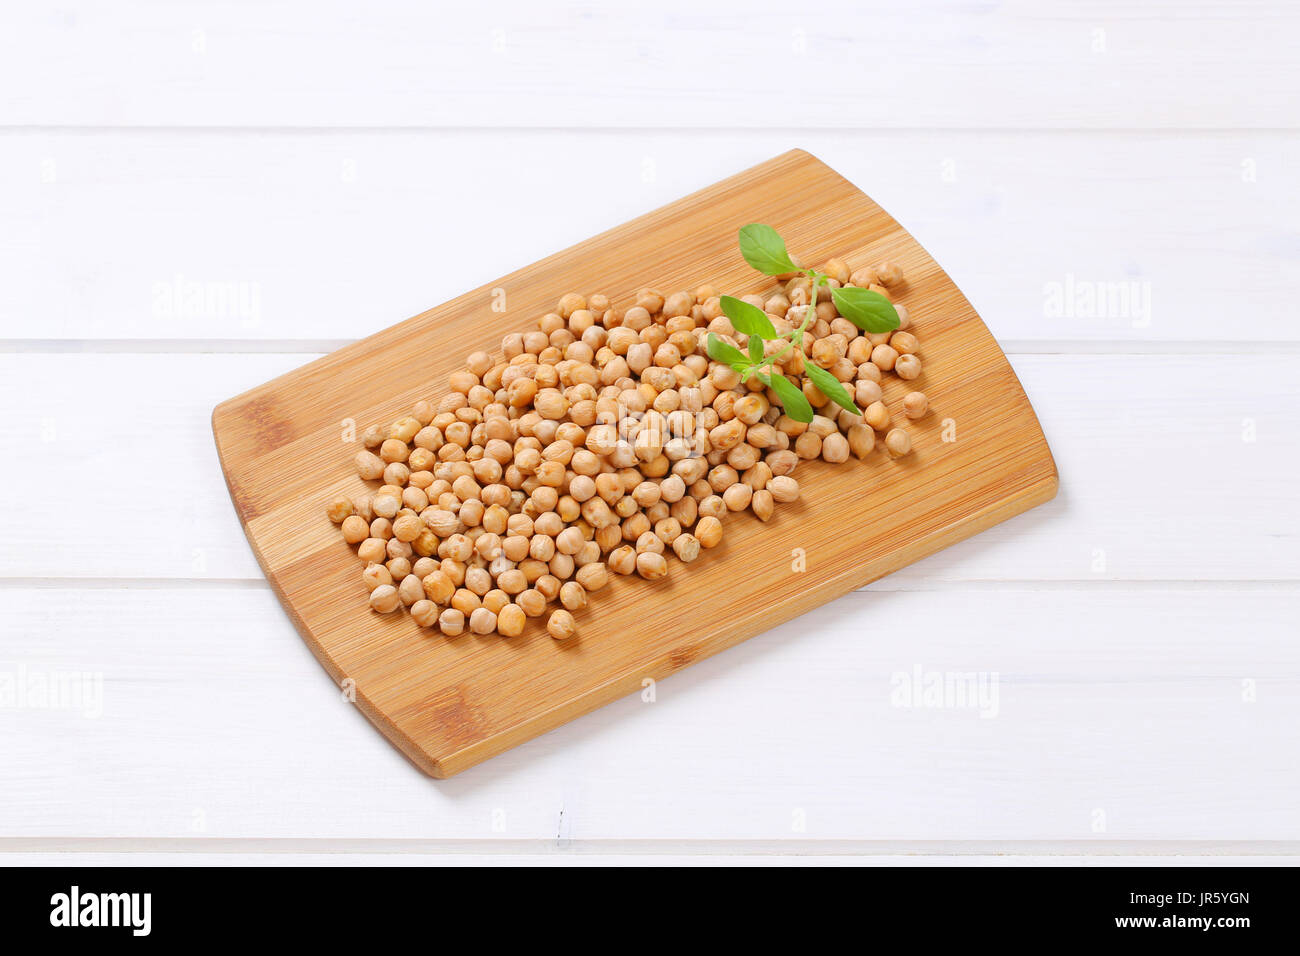 pile of raw chickpeas on wooden cutting board Stock Photo